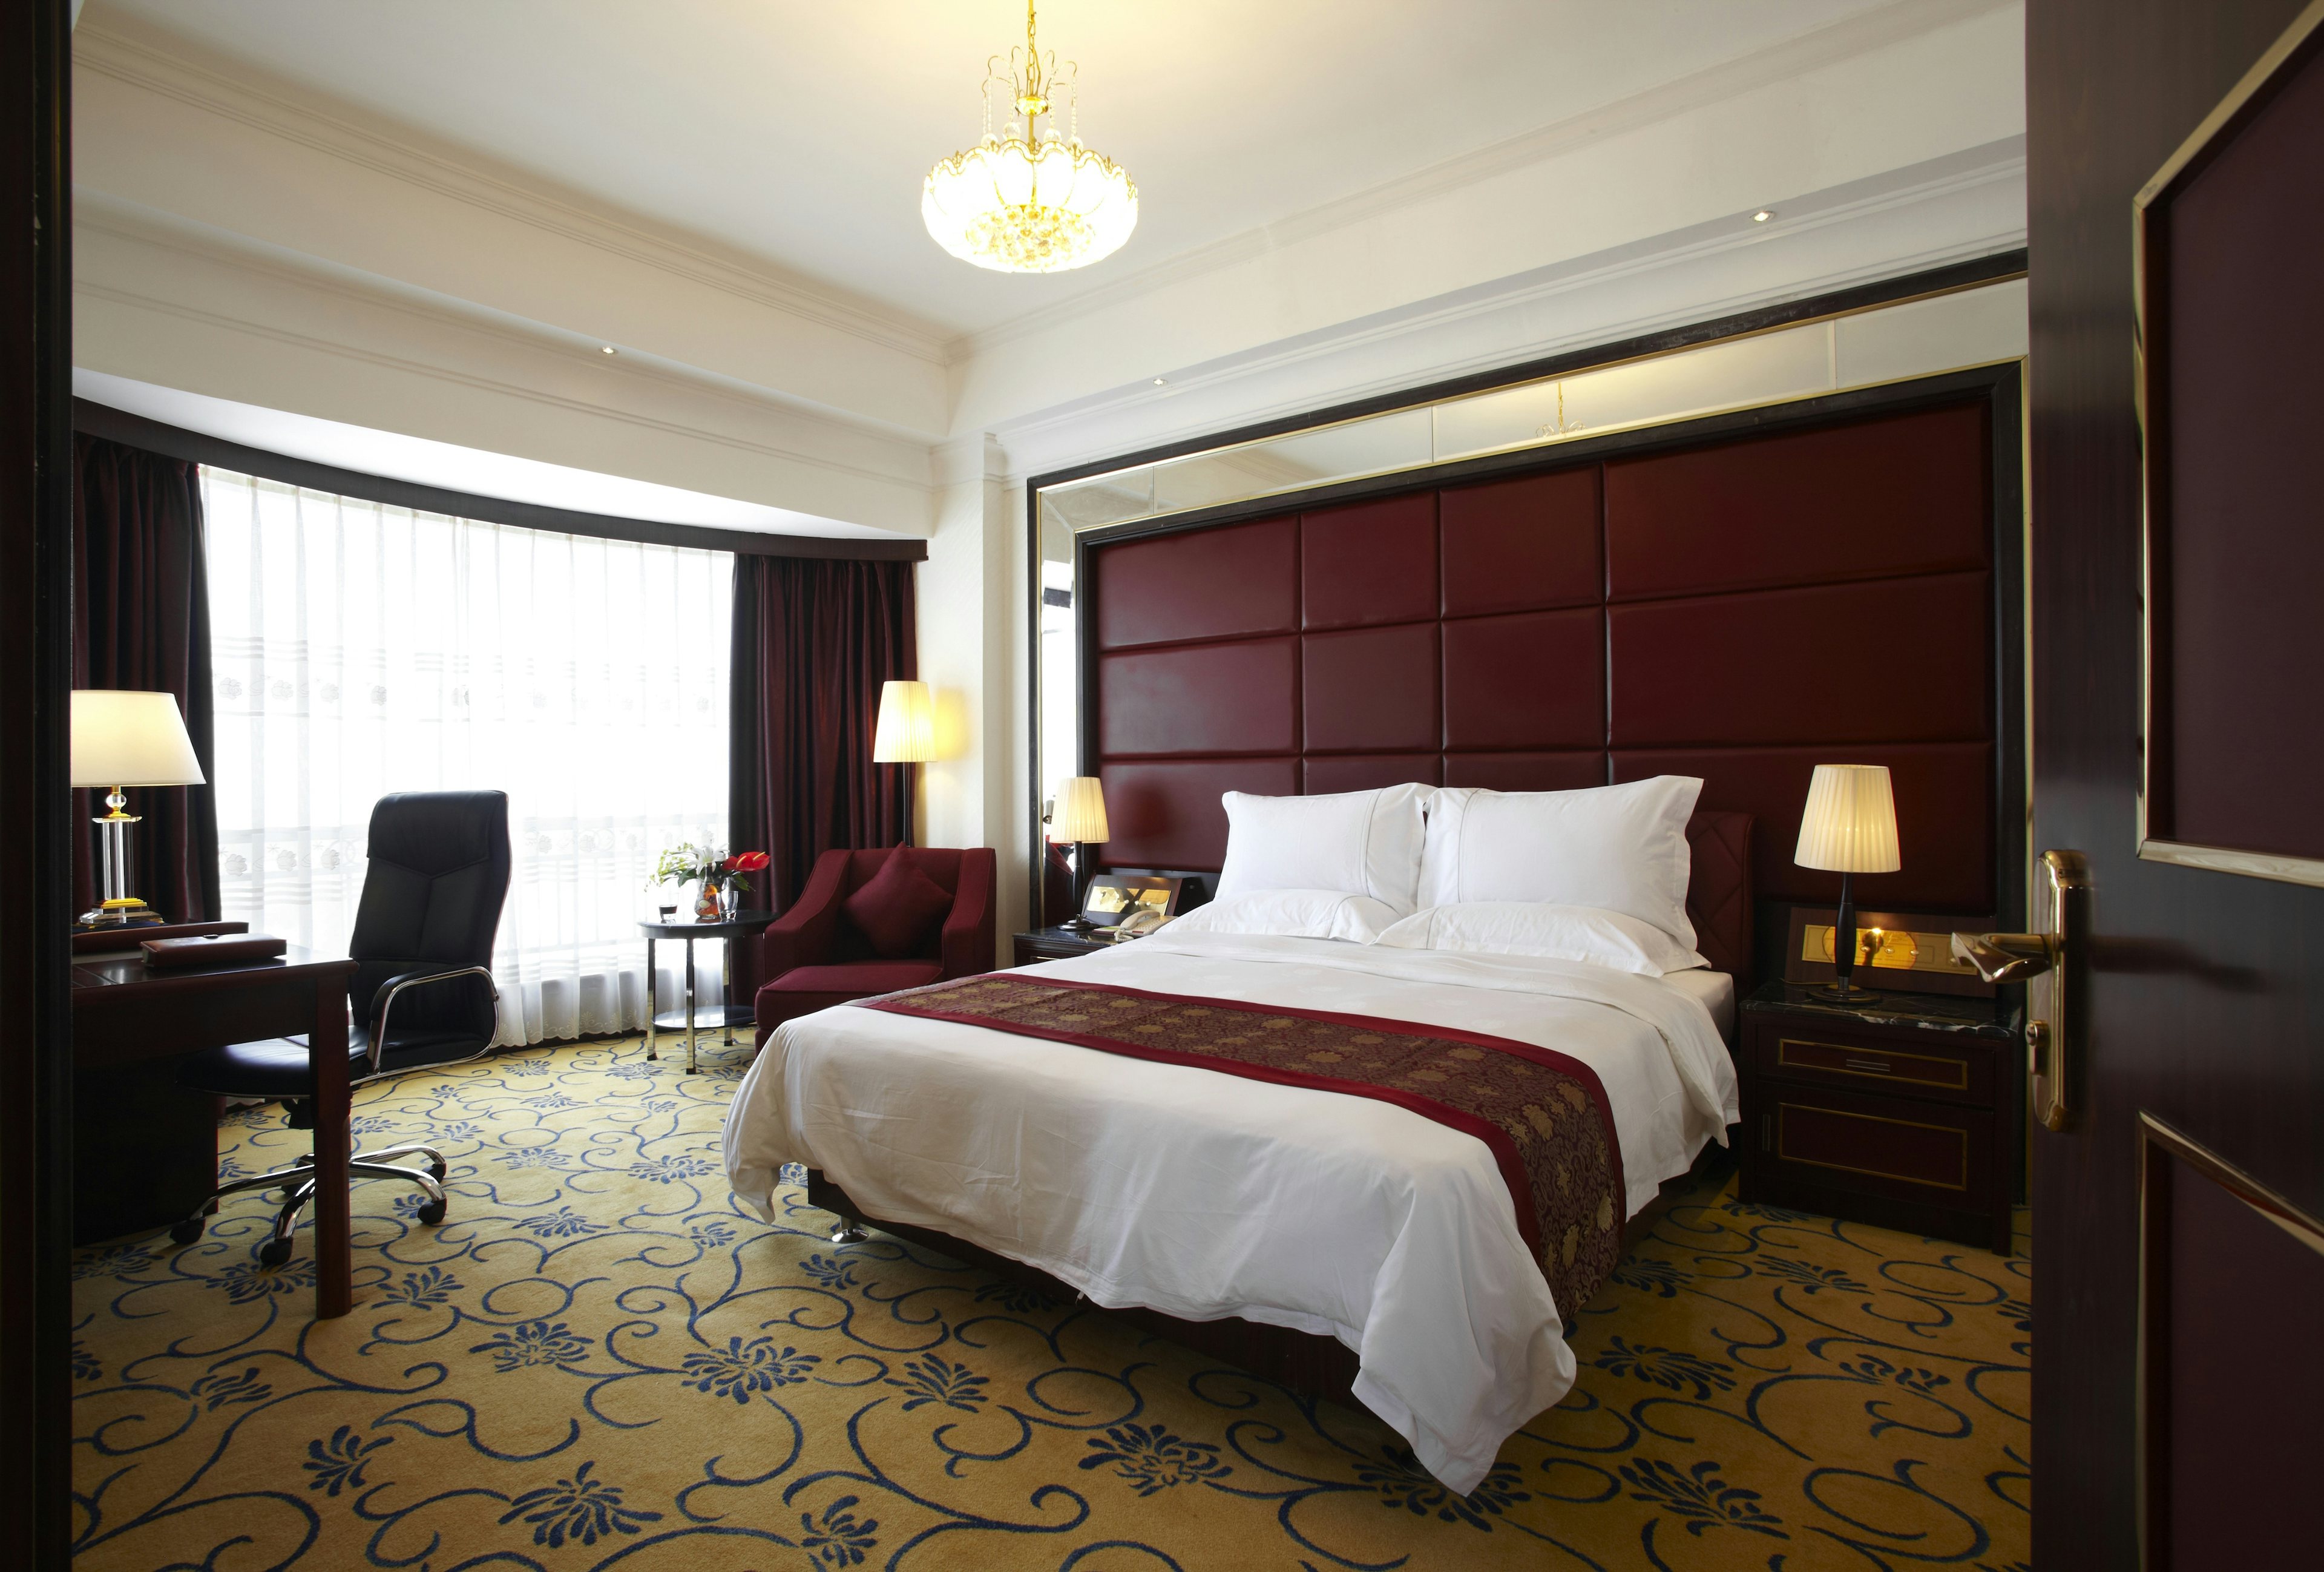 Most hotels offer the same experience, often in an underwhelming fashion. Photo: Shutterstock